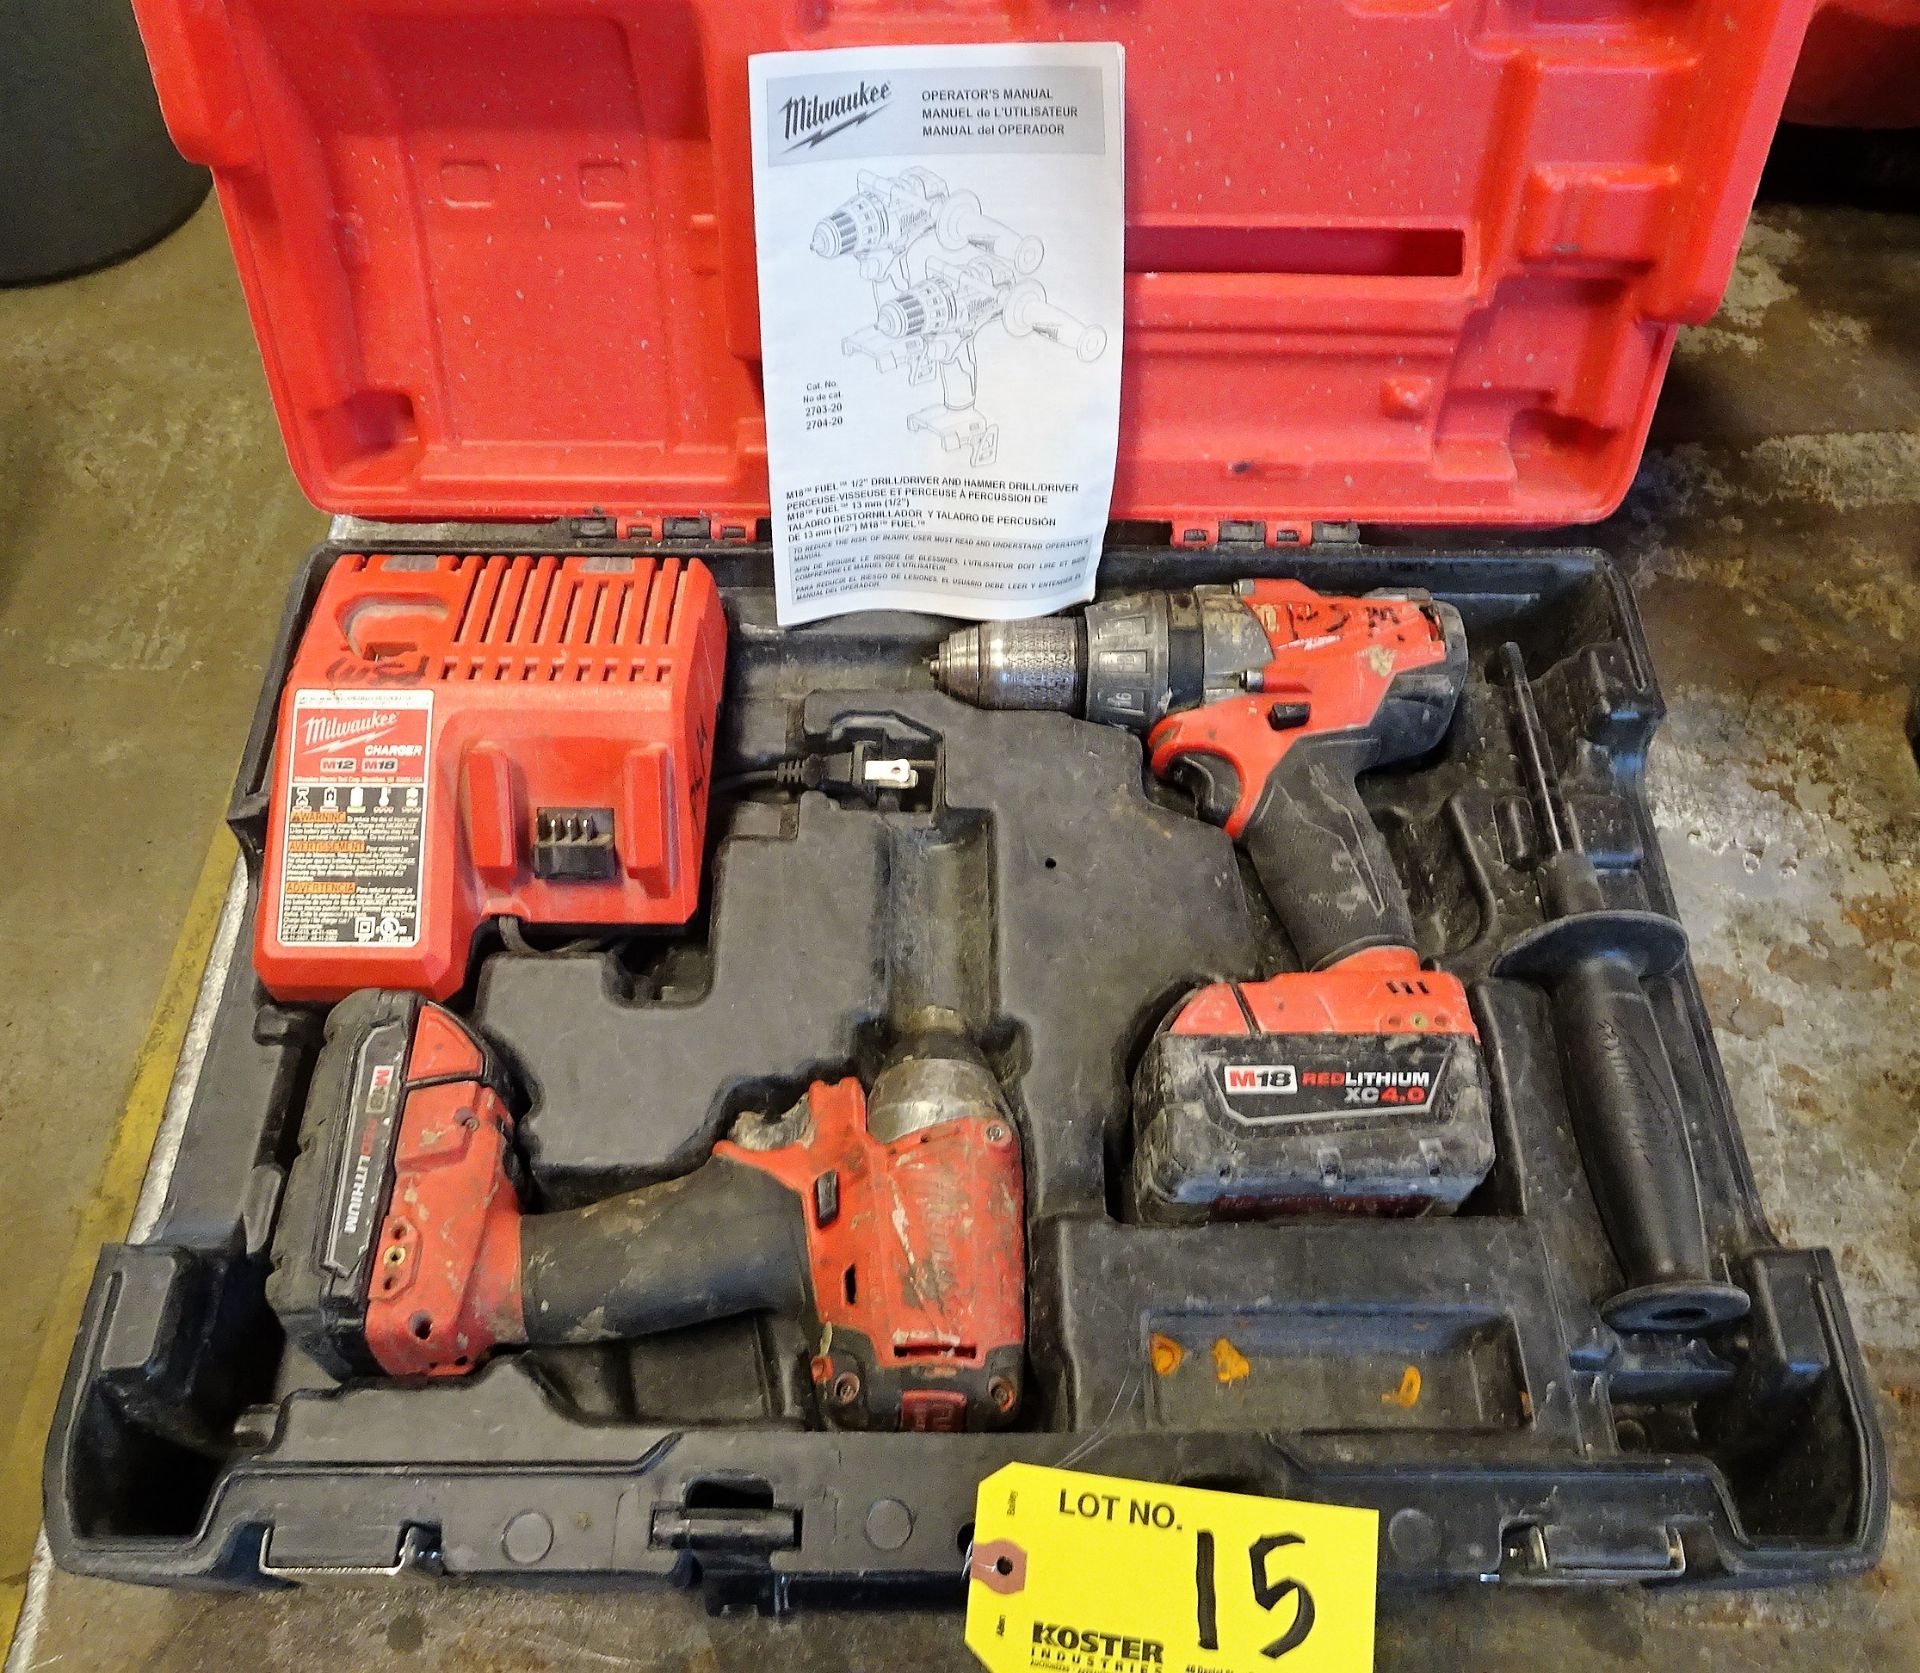 Milwaukee Mdl. 2797-22 1/2" Drill Driver and Hammer Drill Driver Set, 18 Volt, with (2) Batteries,